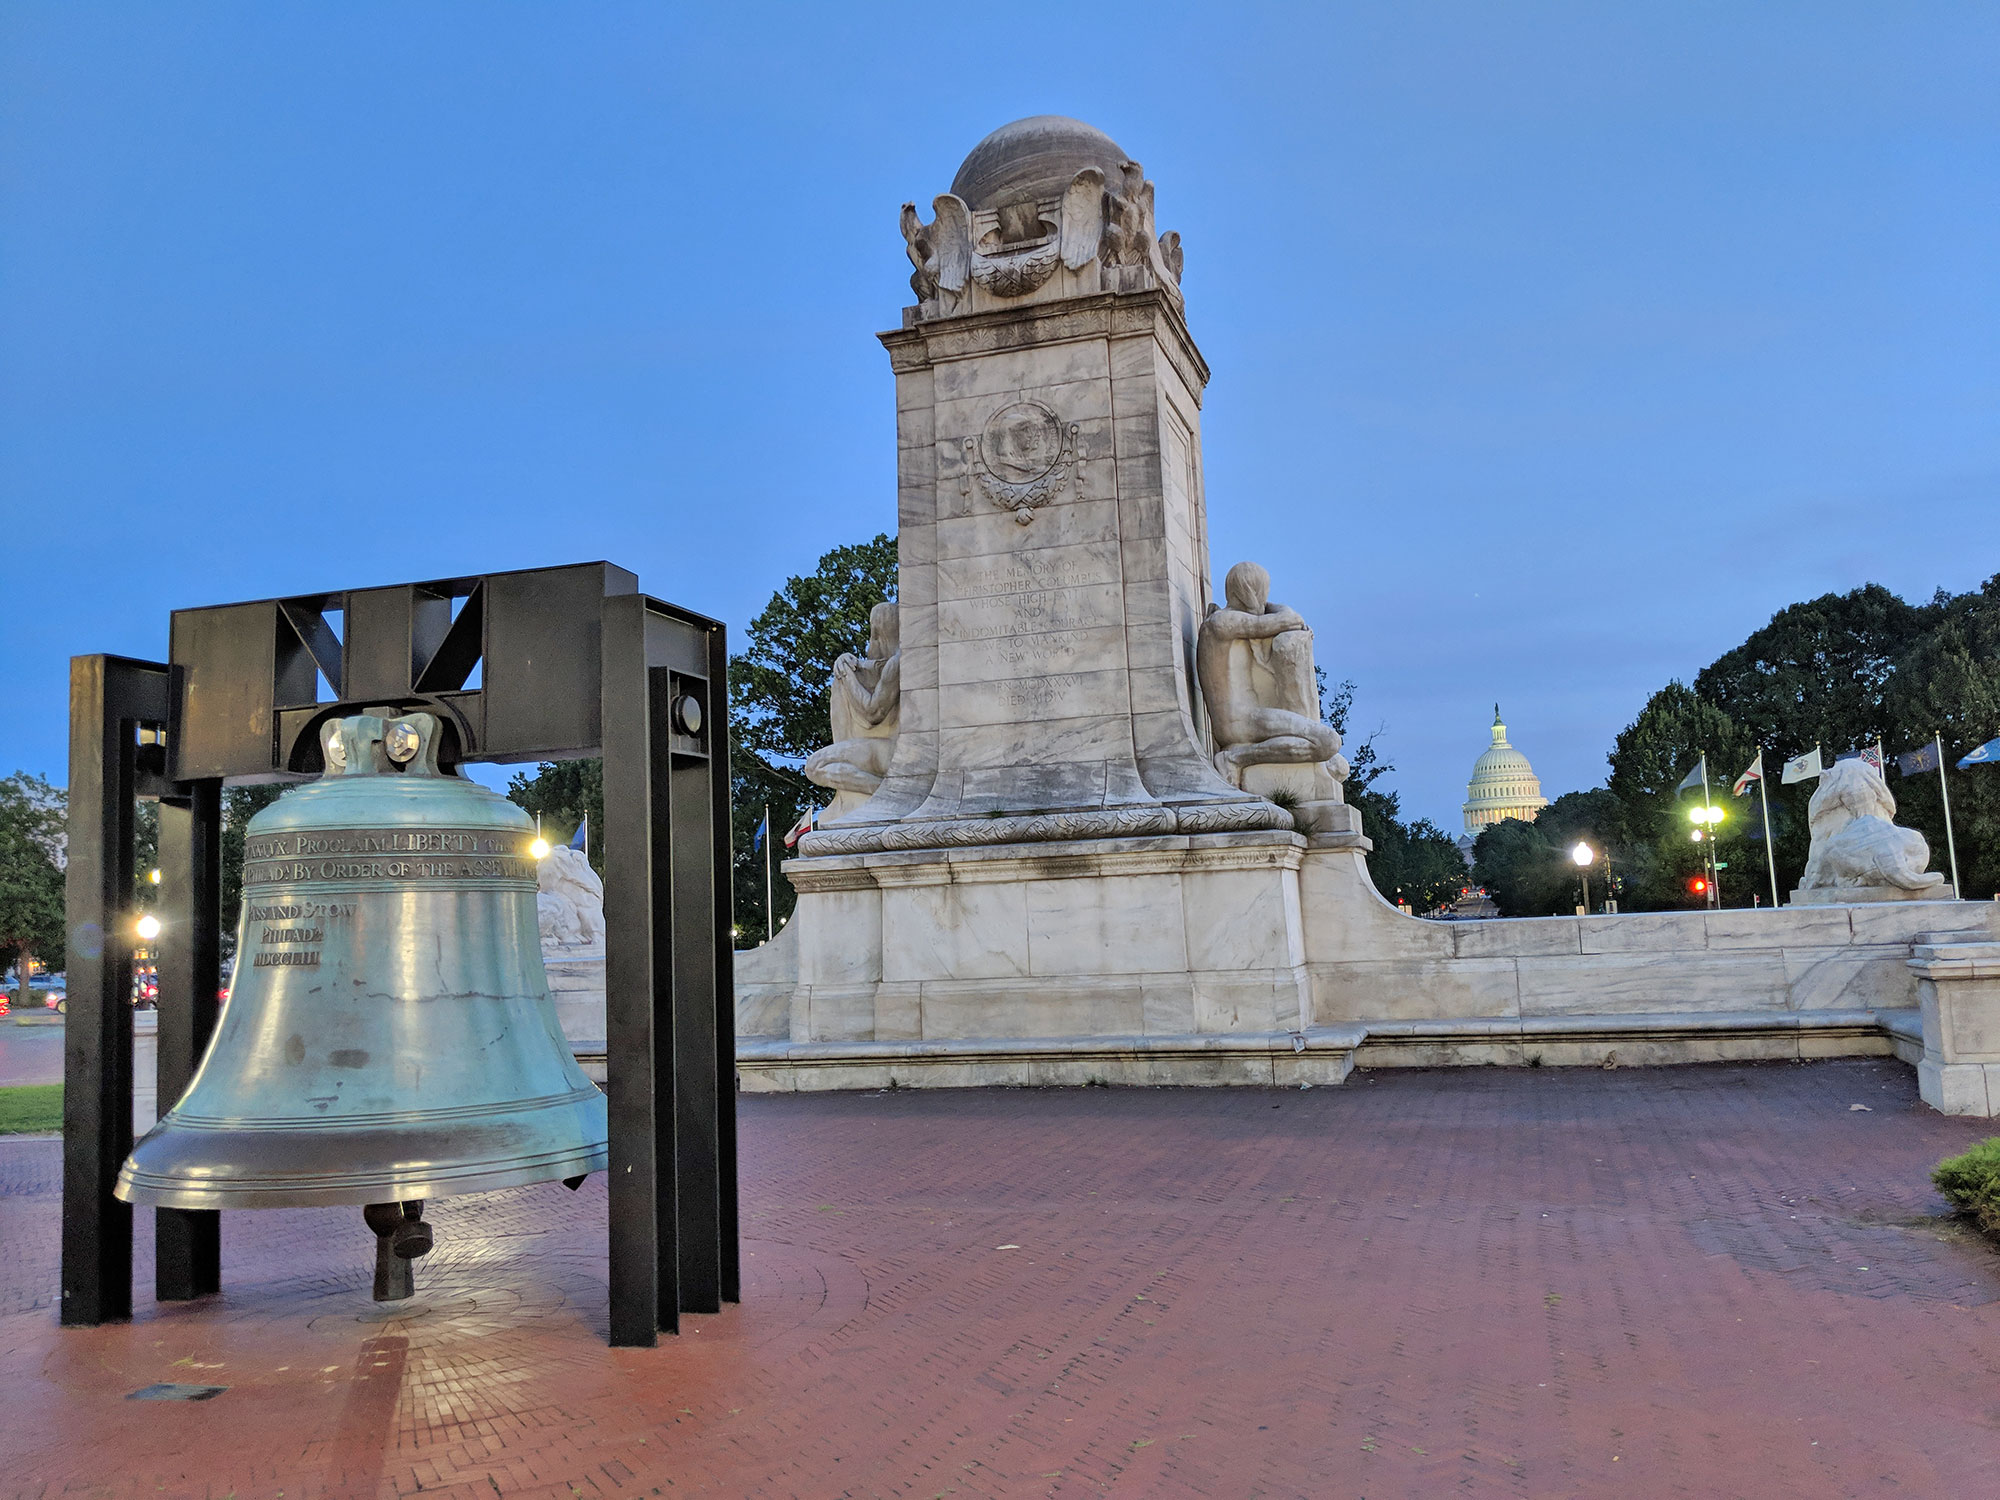 The Columbus monument and the liberty bell in front of Union Station.